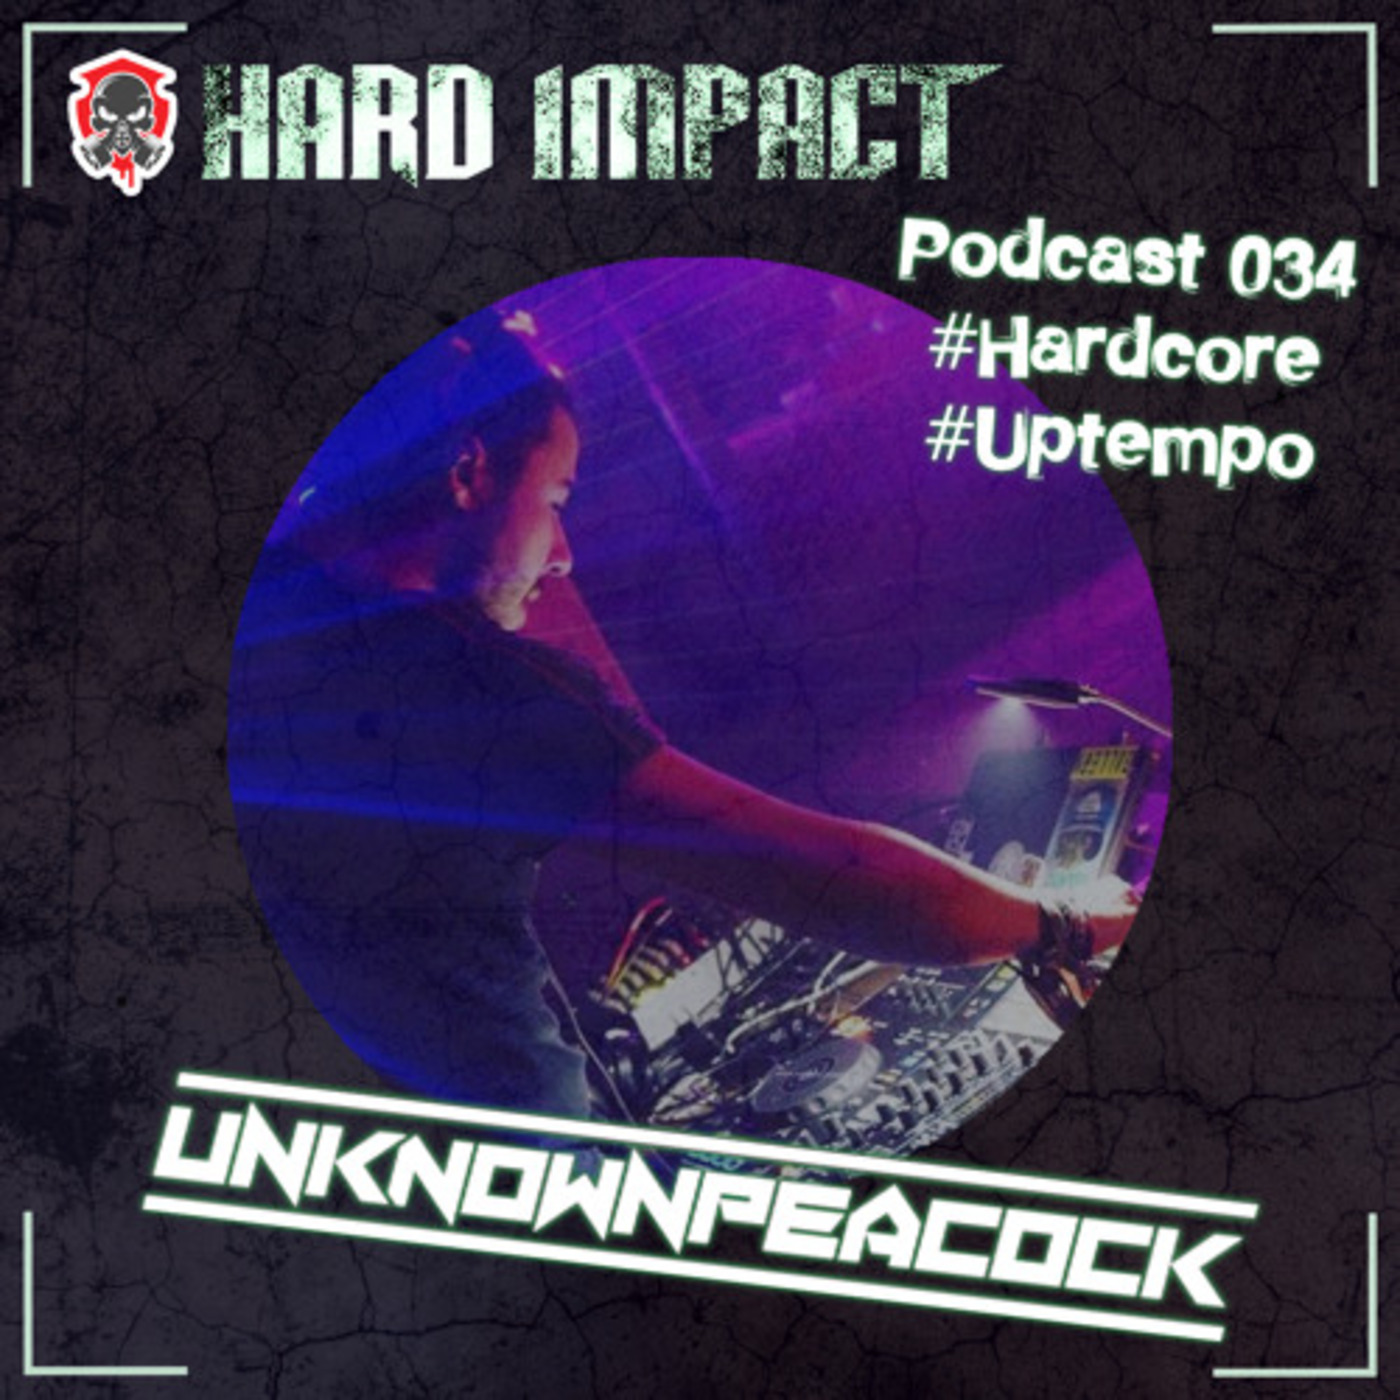 Hardcore [to Uptempo] Mix | by Unknownpeacock | August 2021 | Hard Impact